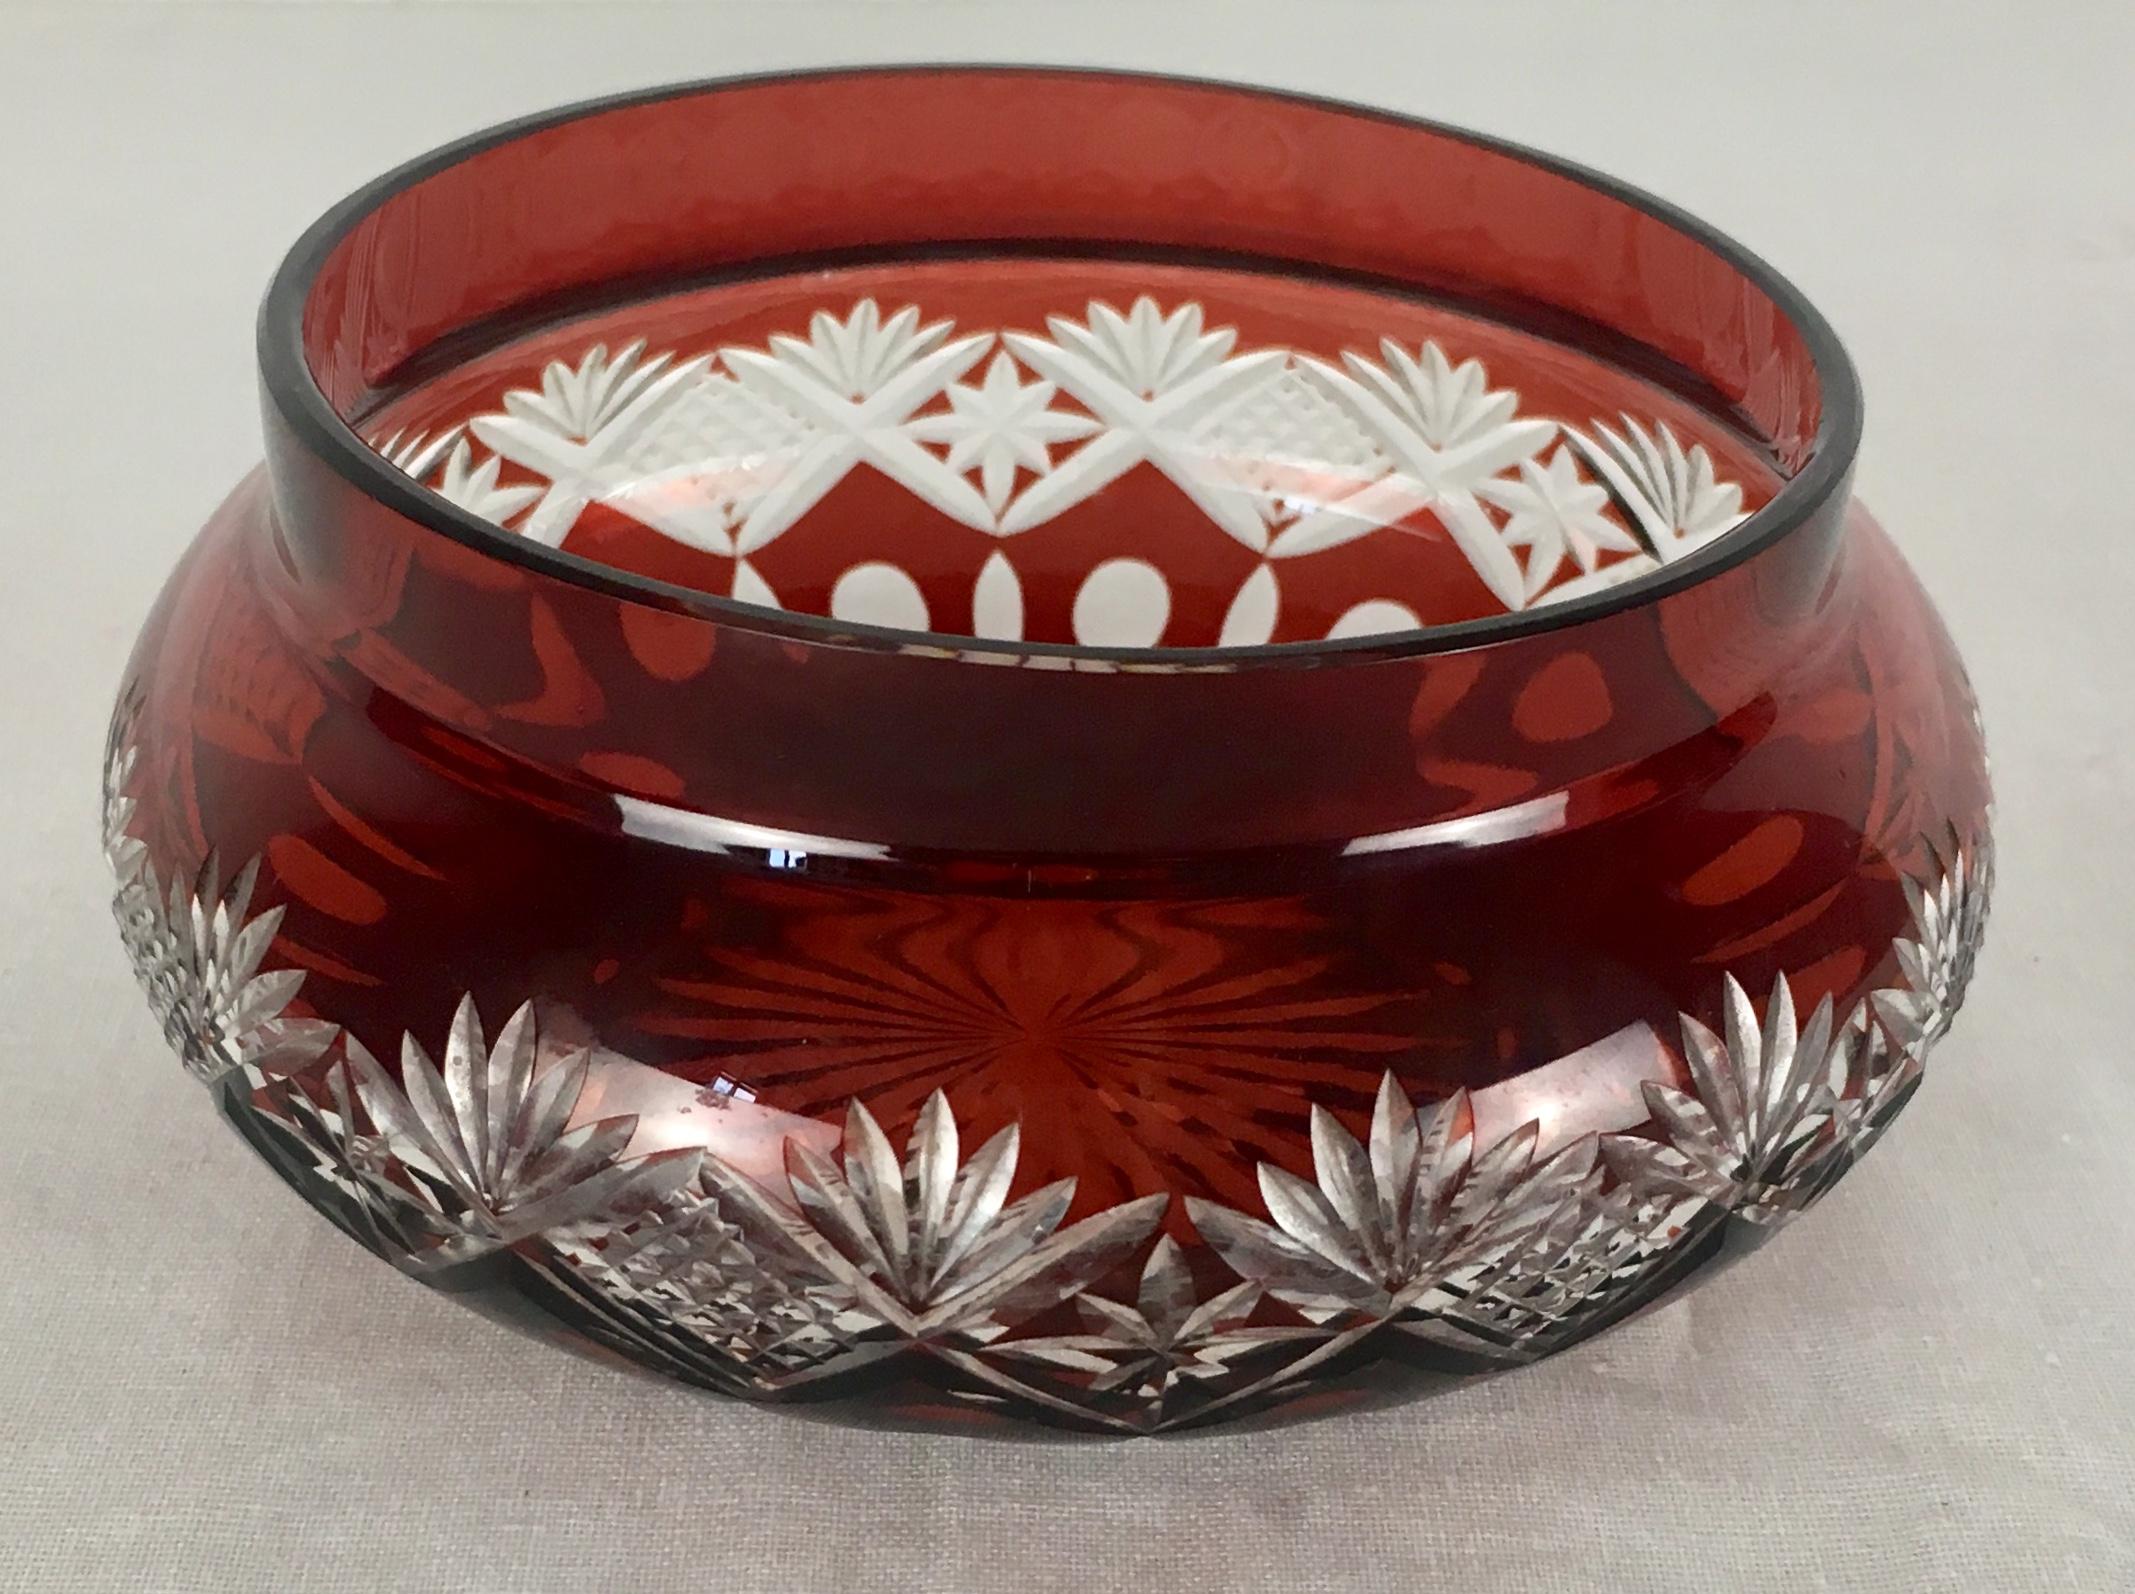 Beautiful Baccarat hand-cut crystal covered trinket or jewelry box or candy dish, circa 1930. 

Measures: 4 3/4